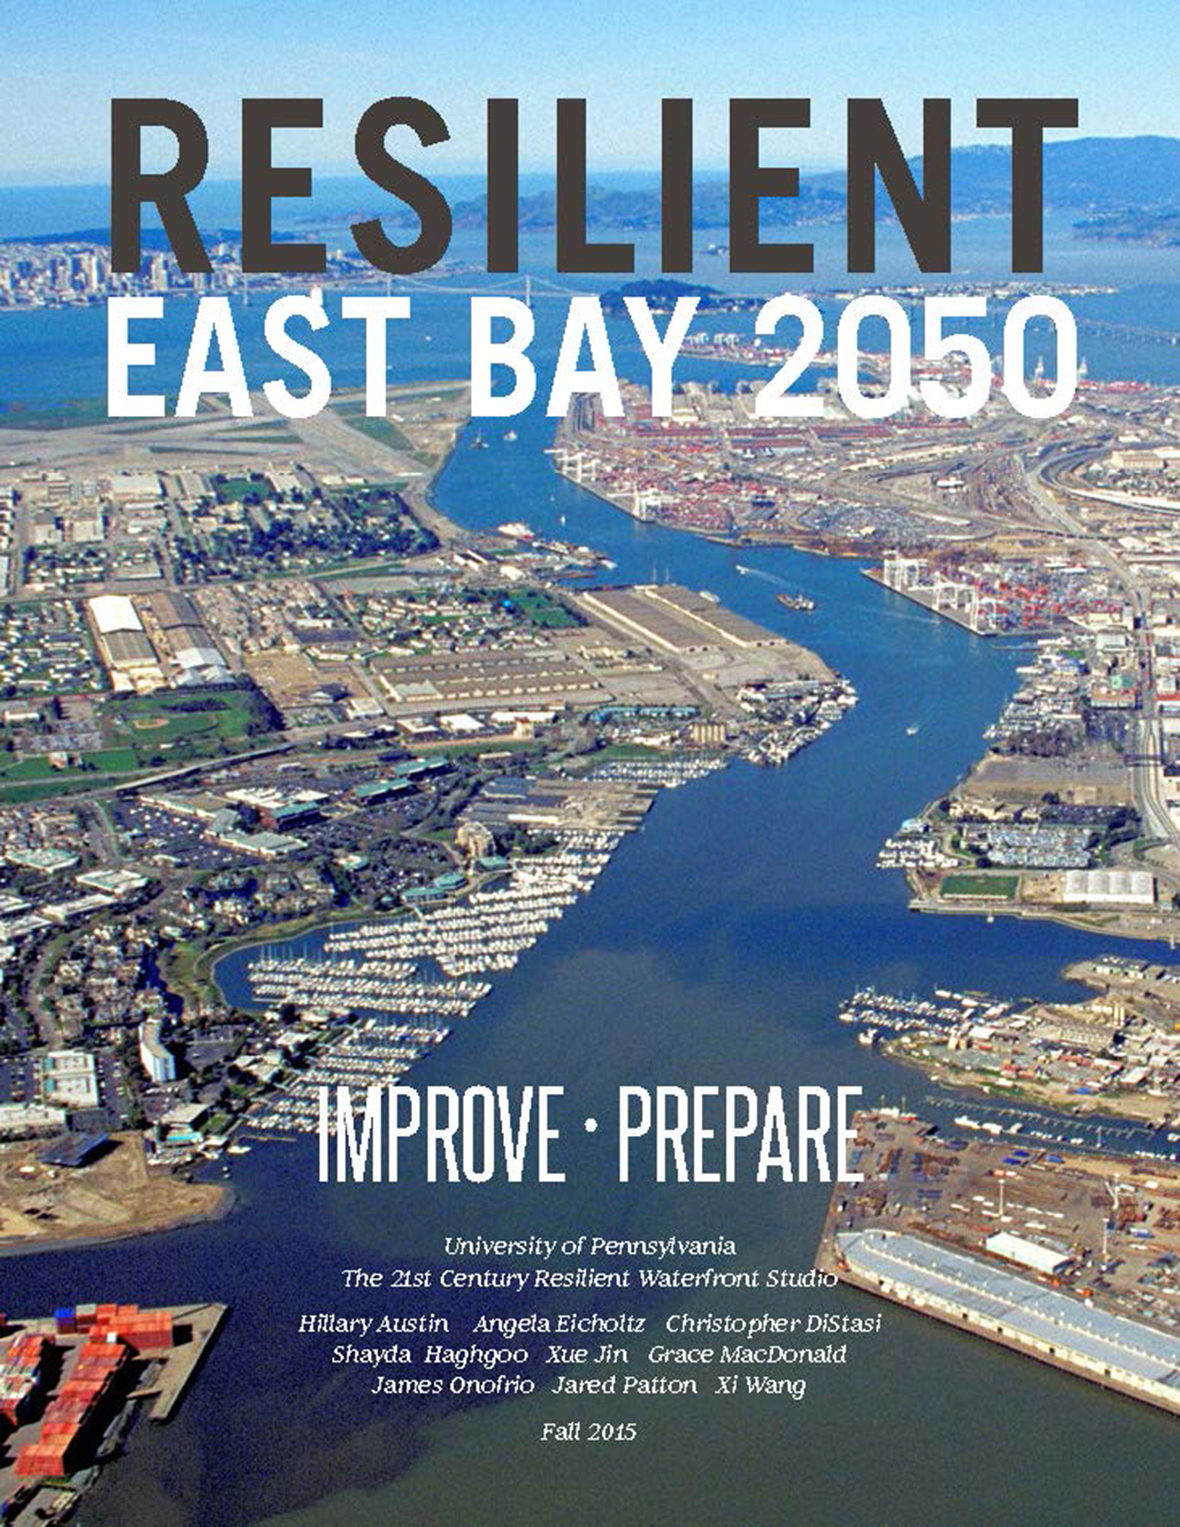 Resilient East Bay 2050 Improve Prepare